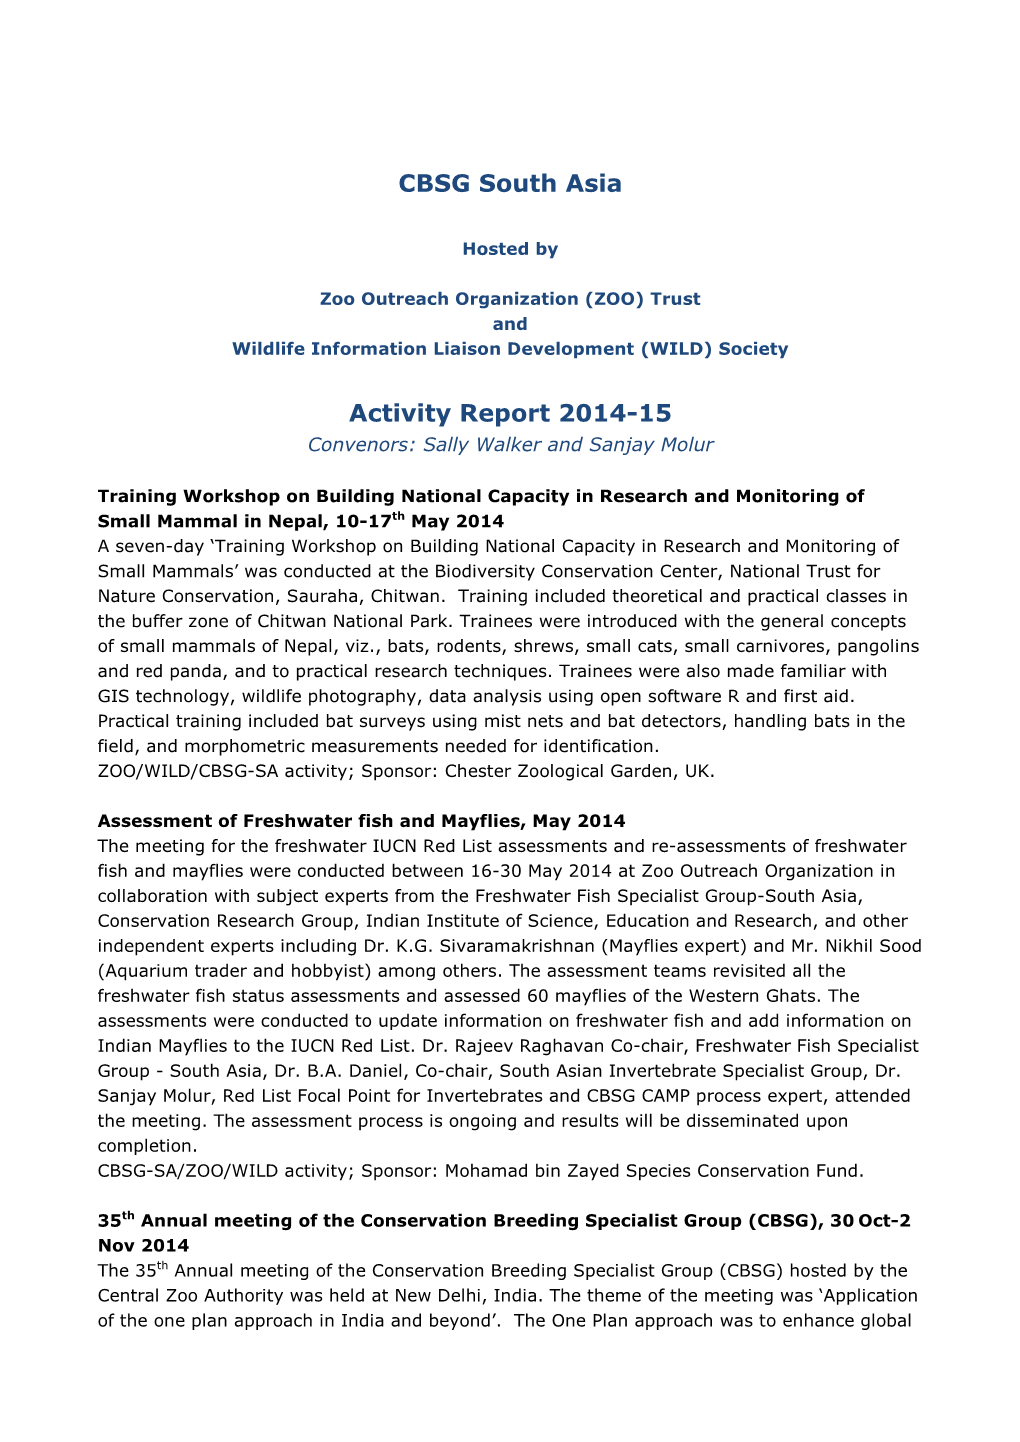 CBSG South Asia Activity Report 2014-15